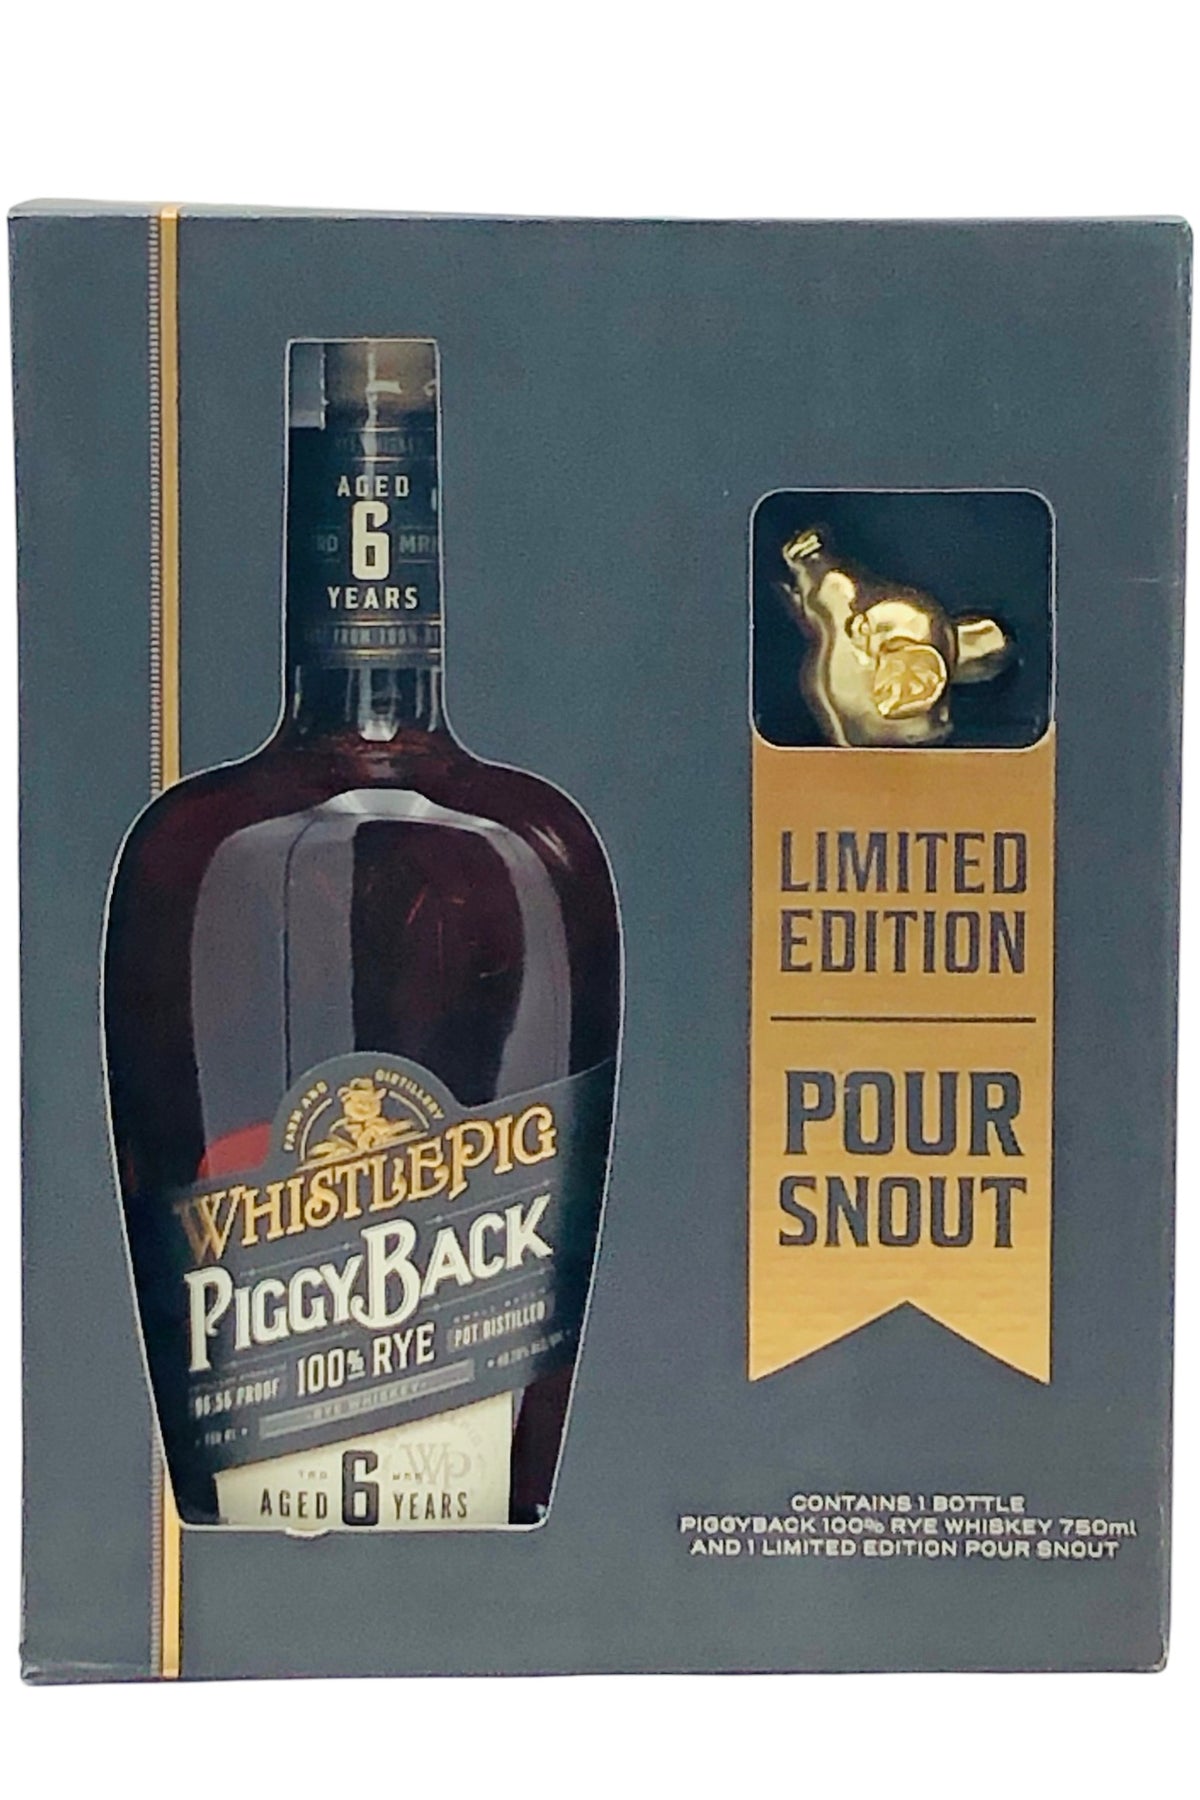 WhistlePig Piggyback 6 Years Old 100% Rye Whiskey with Pour Spout!